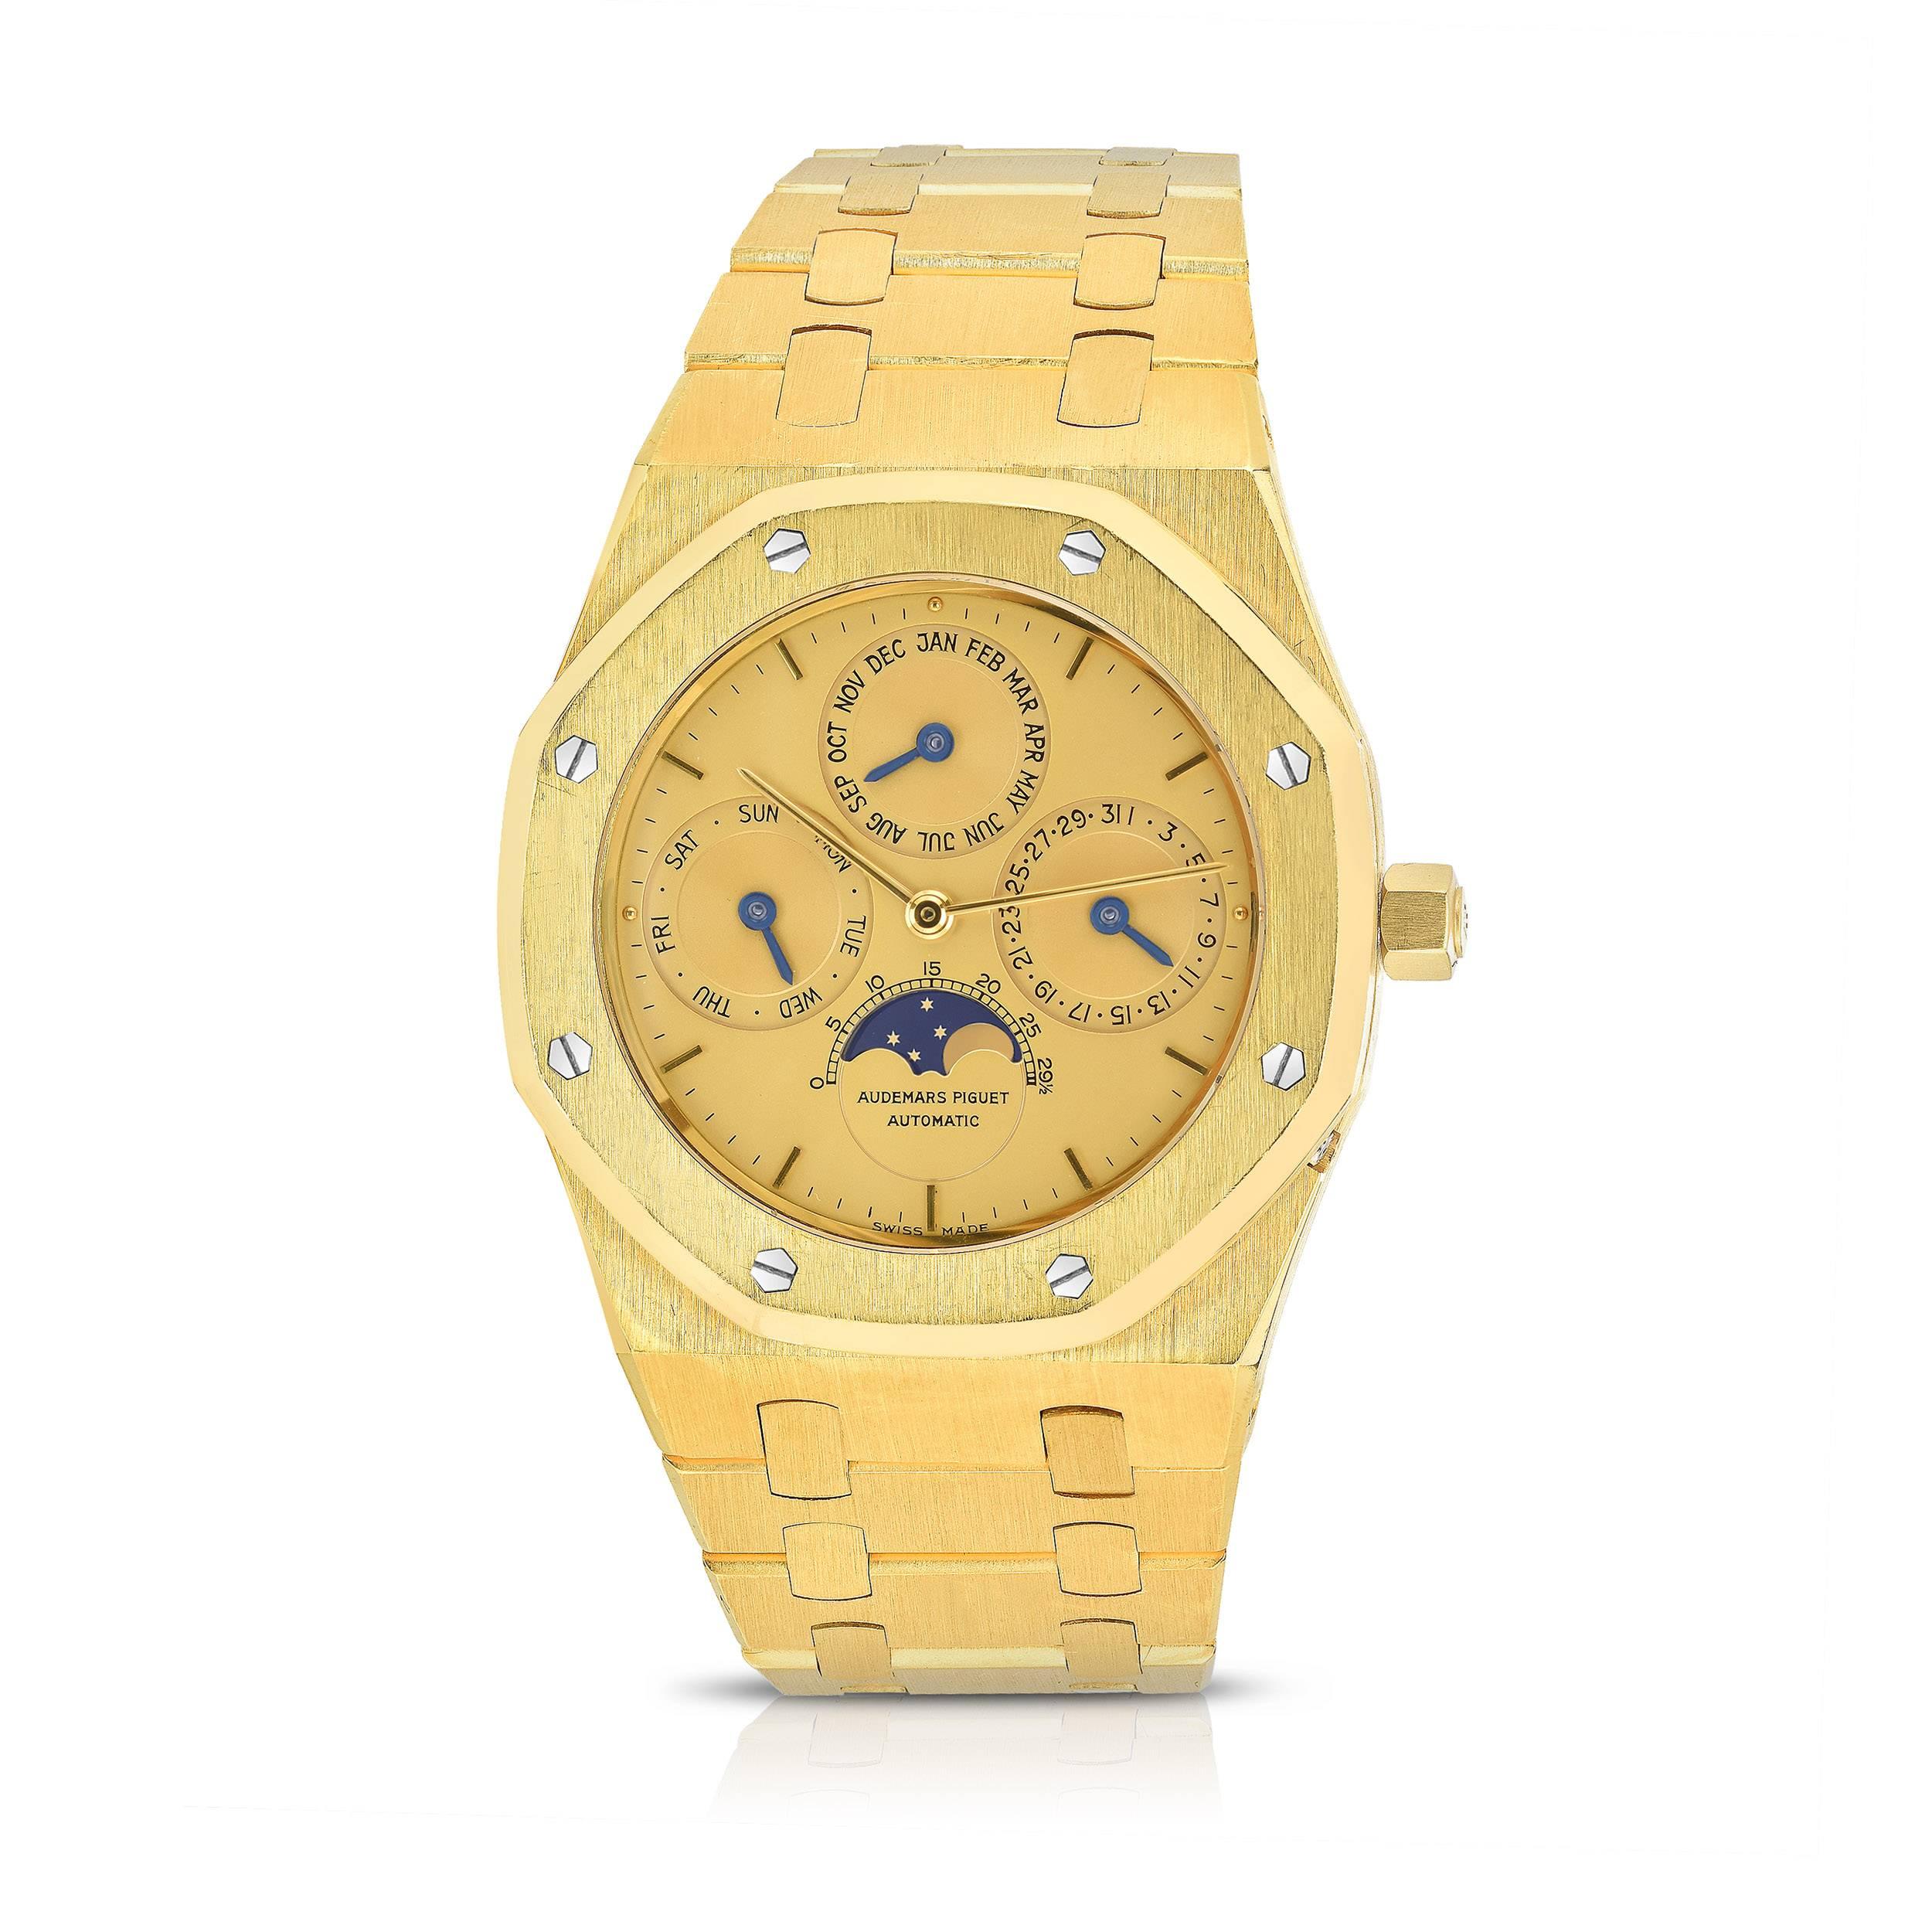 Audemars Piguet Royal Oak 18K Yellow Gold Quantieme Perpetual Watch
Yellow Gold Case
Perpetual Calendar 
39MM 
Champagne Dial with Yellow Gold Hands
18K Yellow Gold Bezel
18K Yellow Gold Bracelet
Signature Clasp
Automatic Movement
Unpolished Case